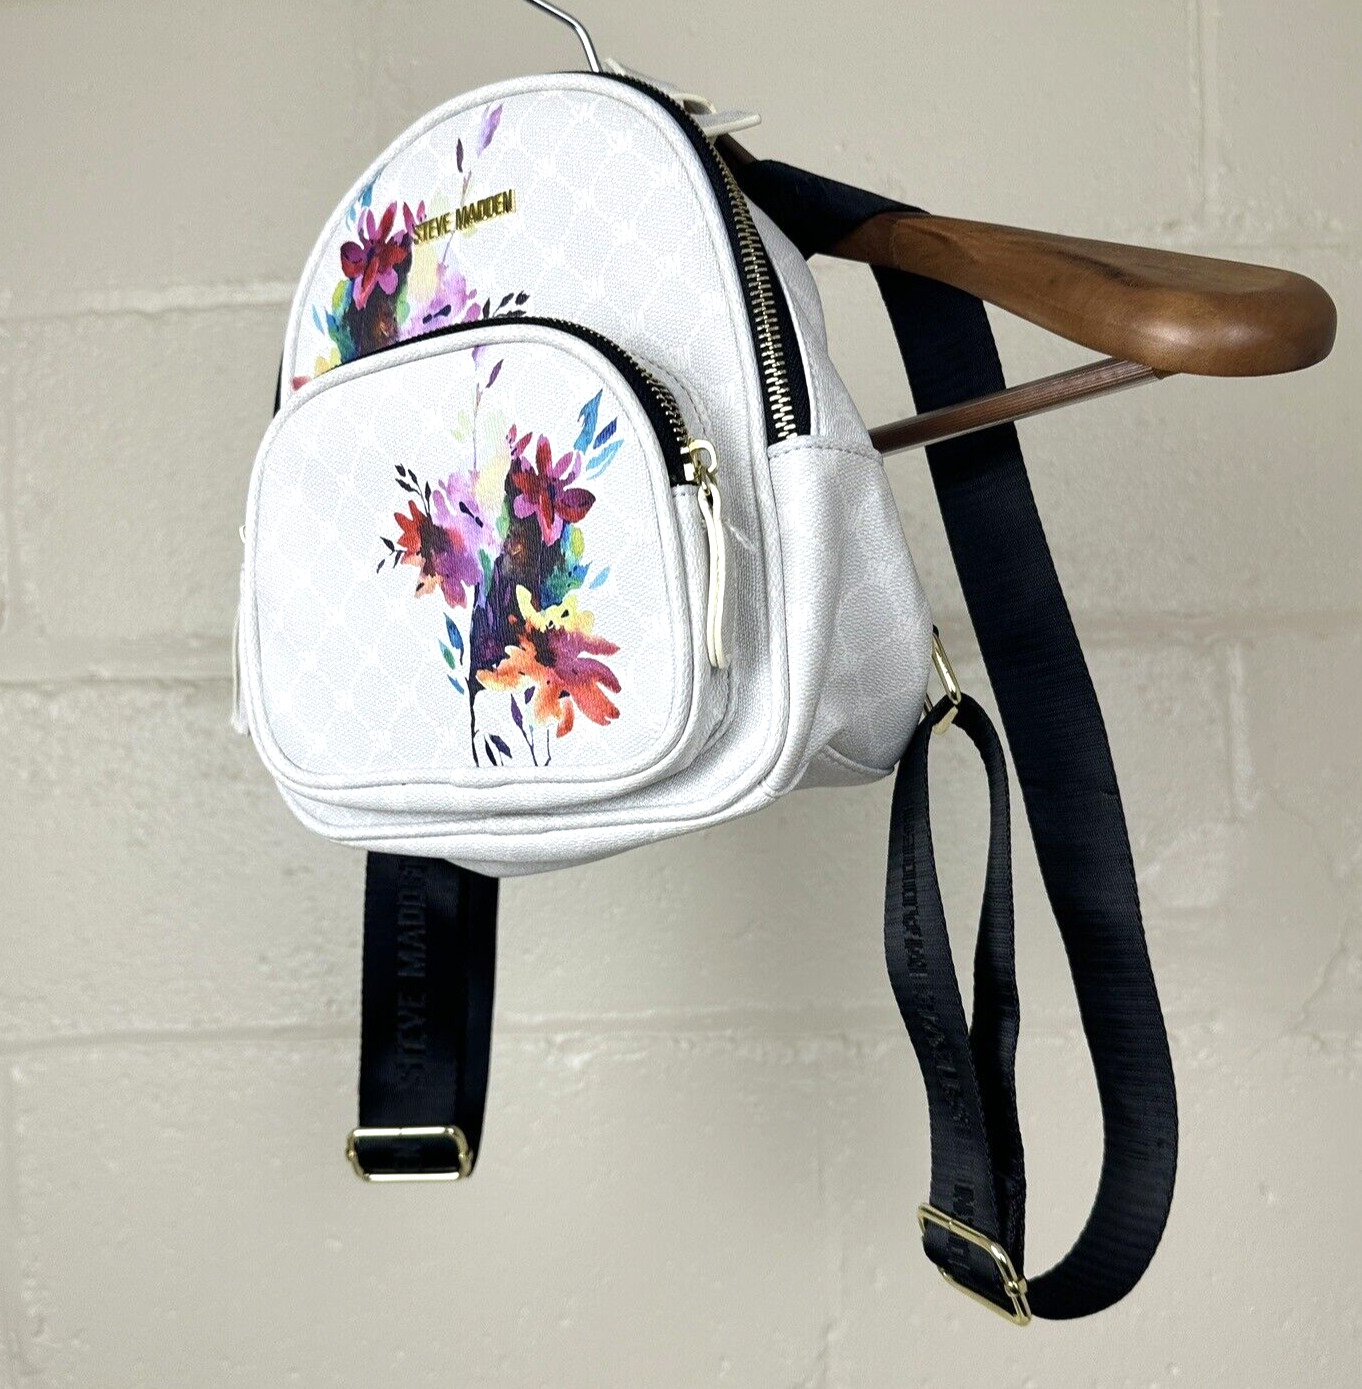 Steve Madden Mini Backpack Purse, White Floral Flowers, Faux Leather Bag